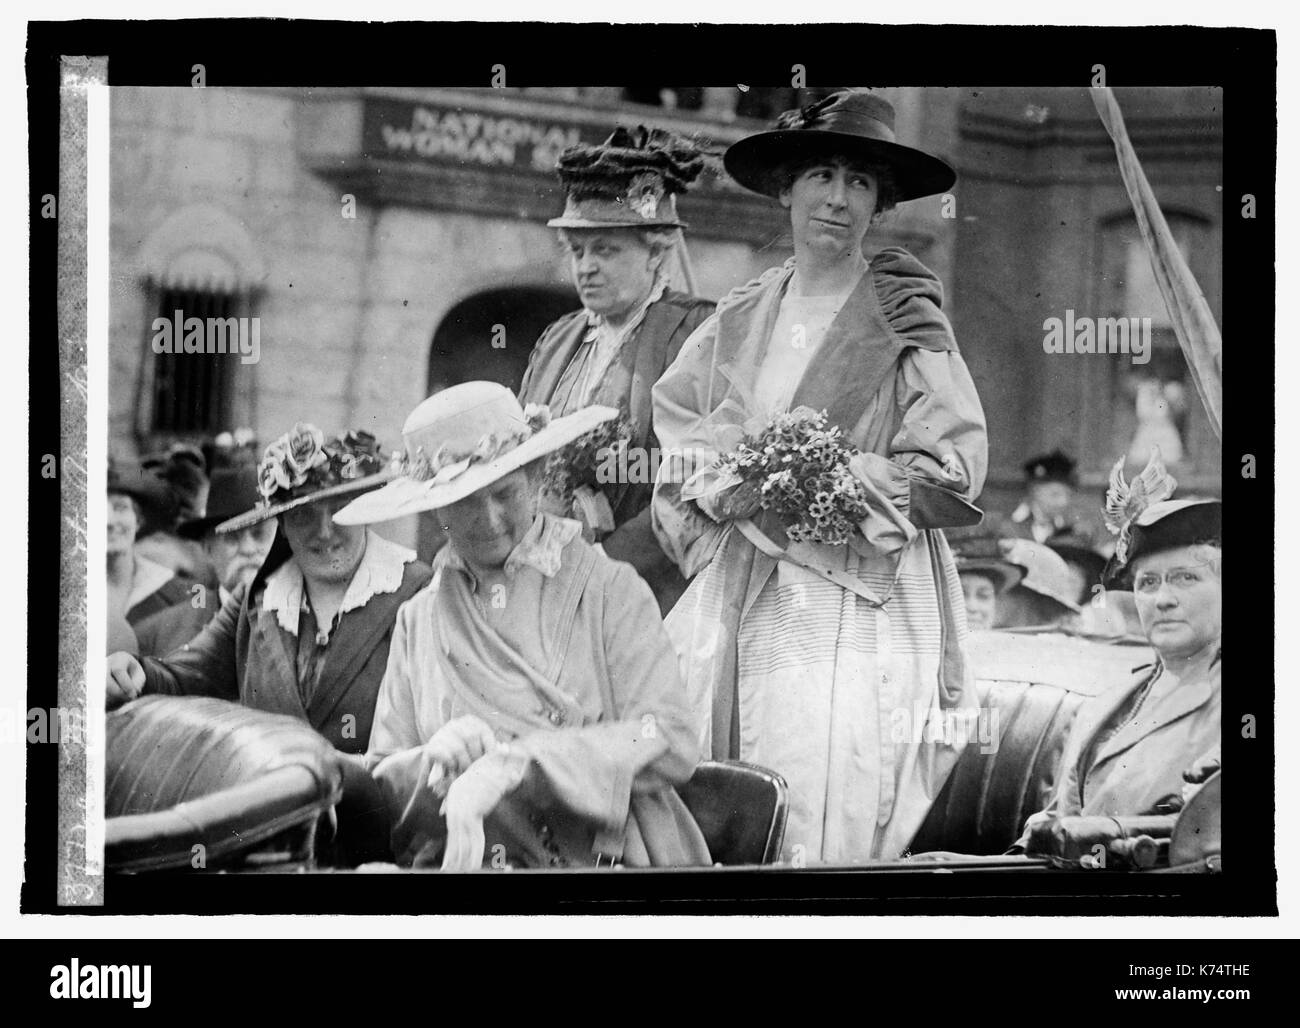 Jeannette Rankin (standing left), the first woman to hold national office in the United States, and Carrie Chapman Catt (standing right), stand in the back of an automobile outside the National American Woman Suffrage Association offices, Washington, DC, 1916. Photo by National Photo Company Stock Photo